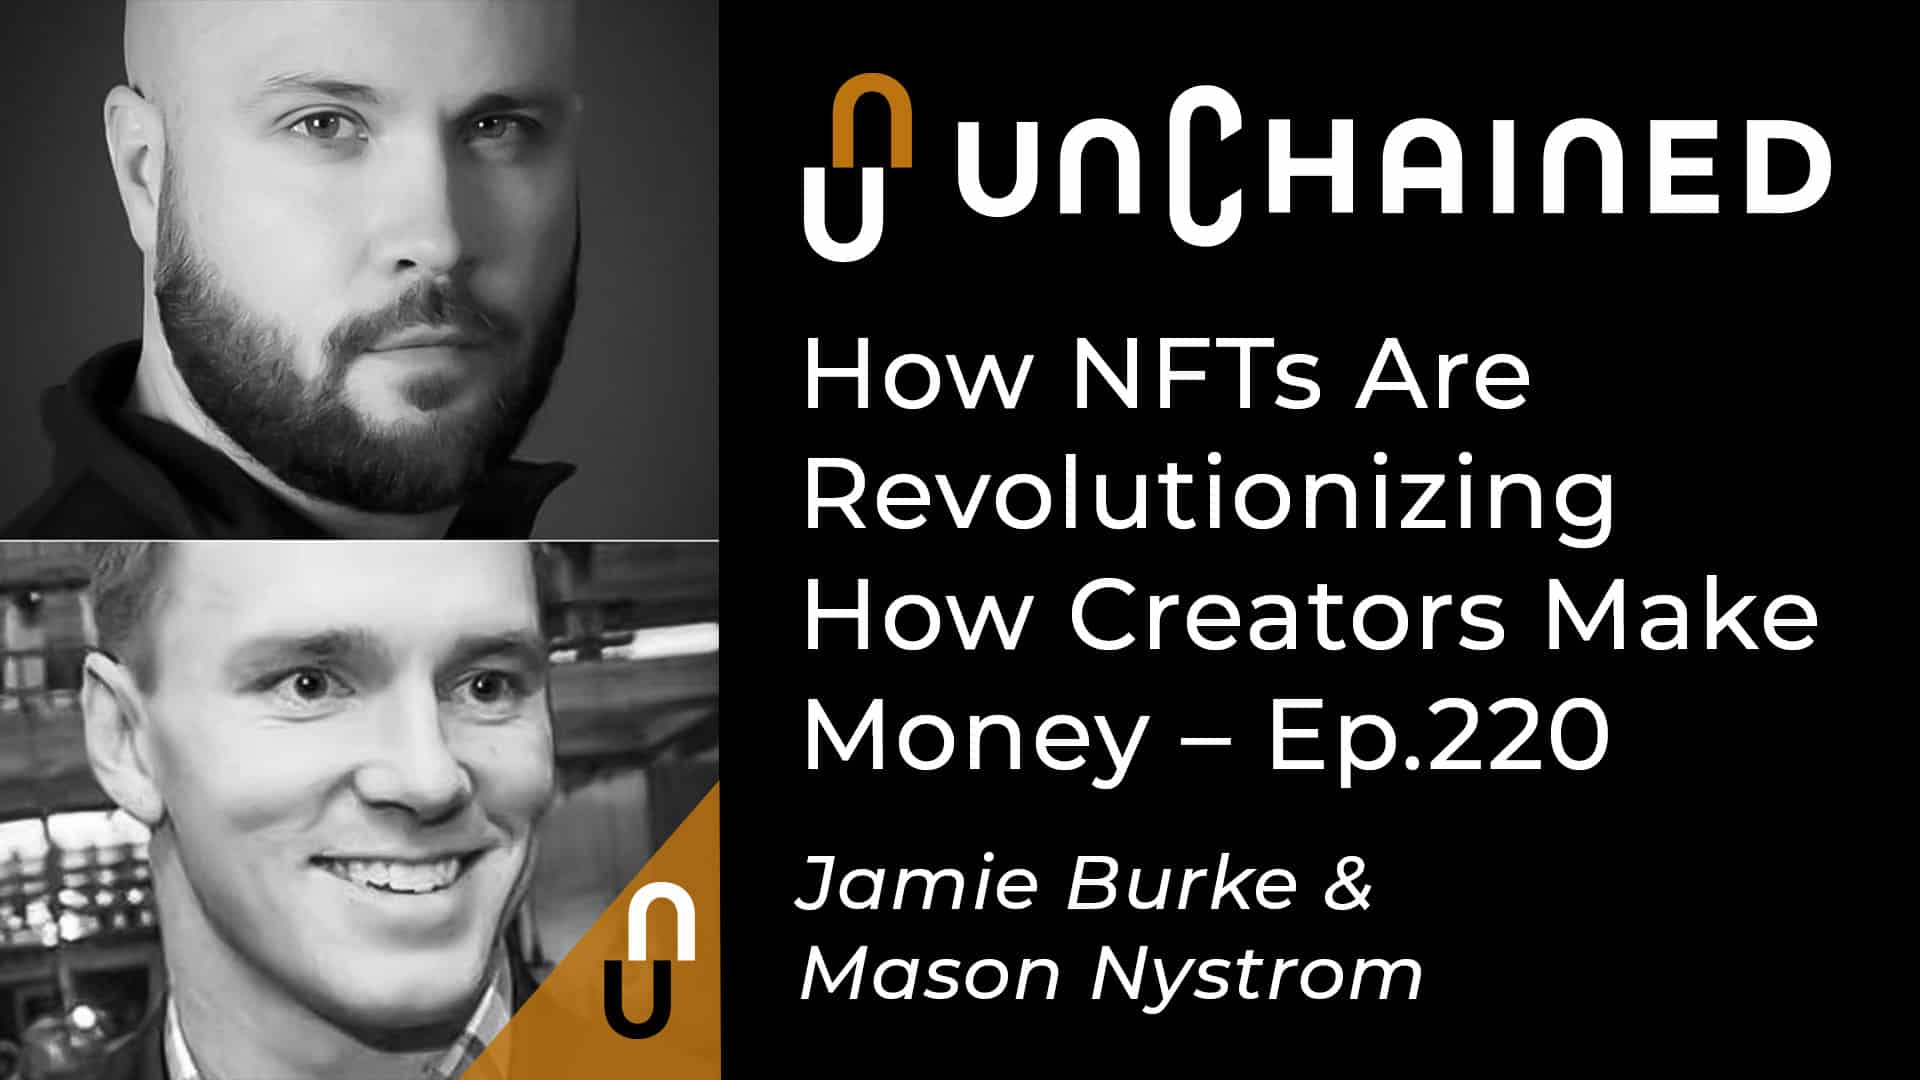 Unchained - Ep.220 - How NFTs Are Revolutionizing How Creators Make Money